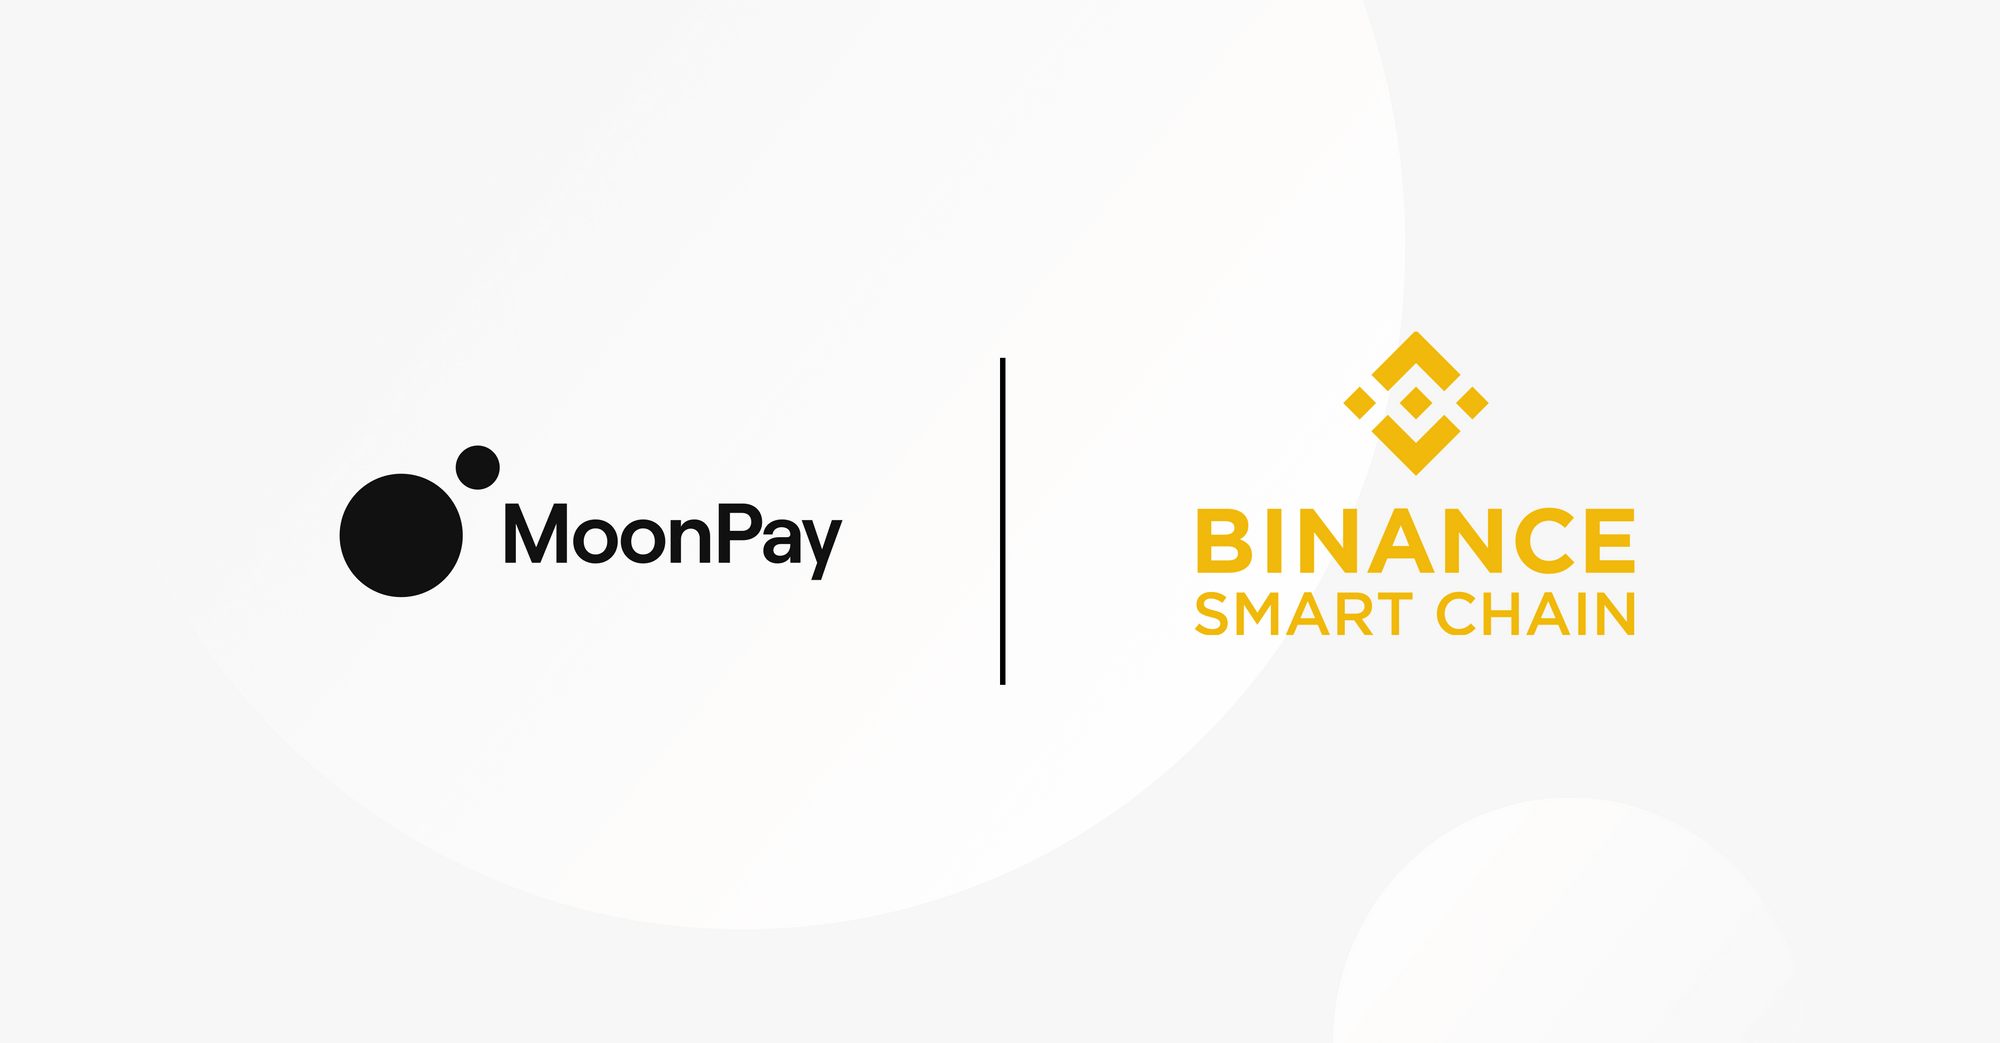 Binance Smart Chain Assets Supported by MoonPay